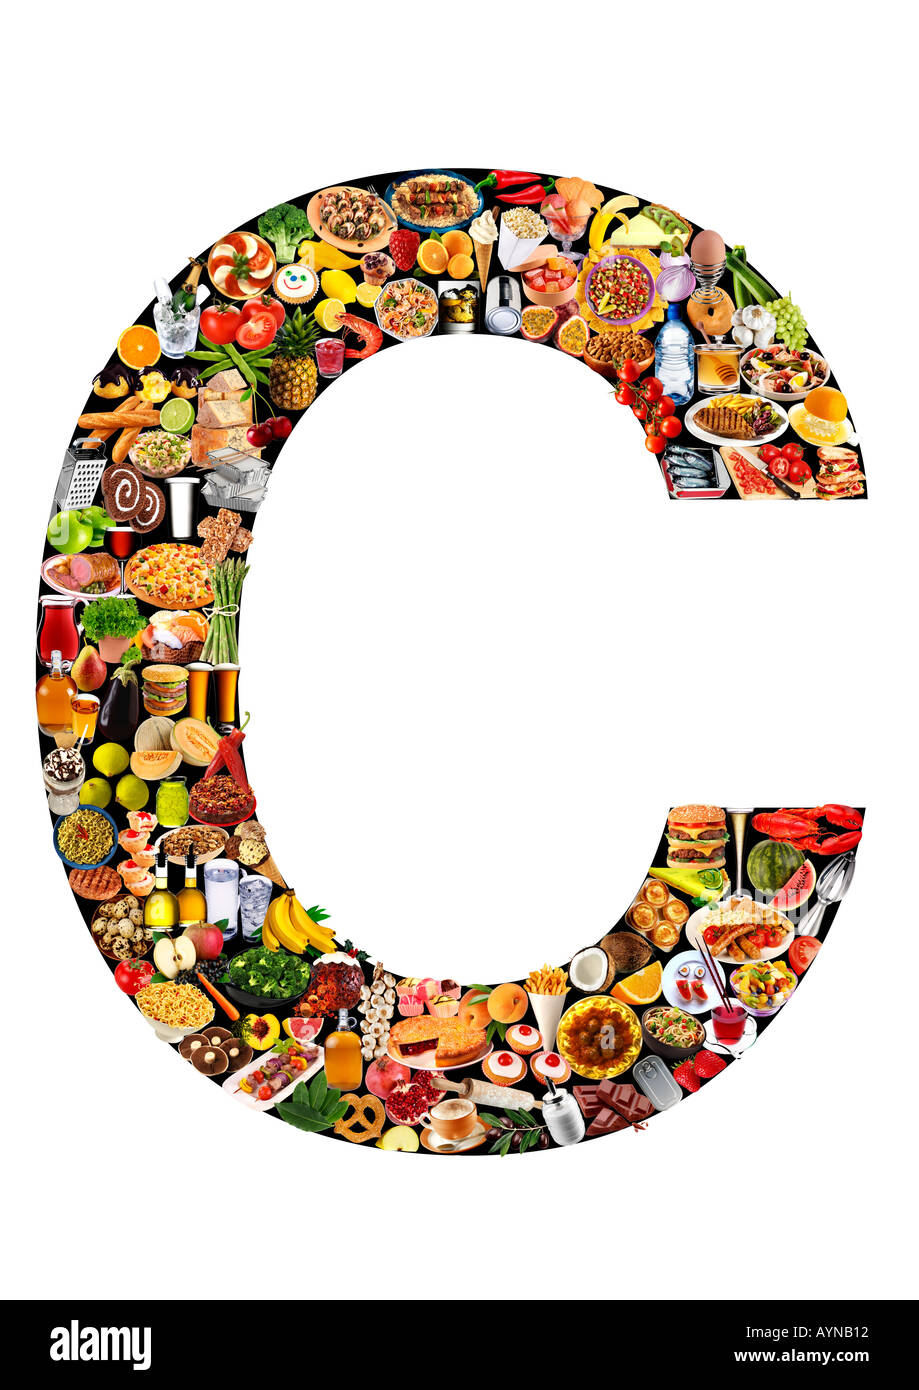 FOODFONT LETTER C ON BLACK AND WHITE Stock Photo